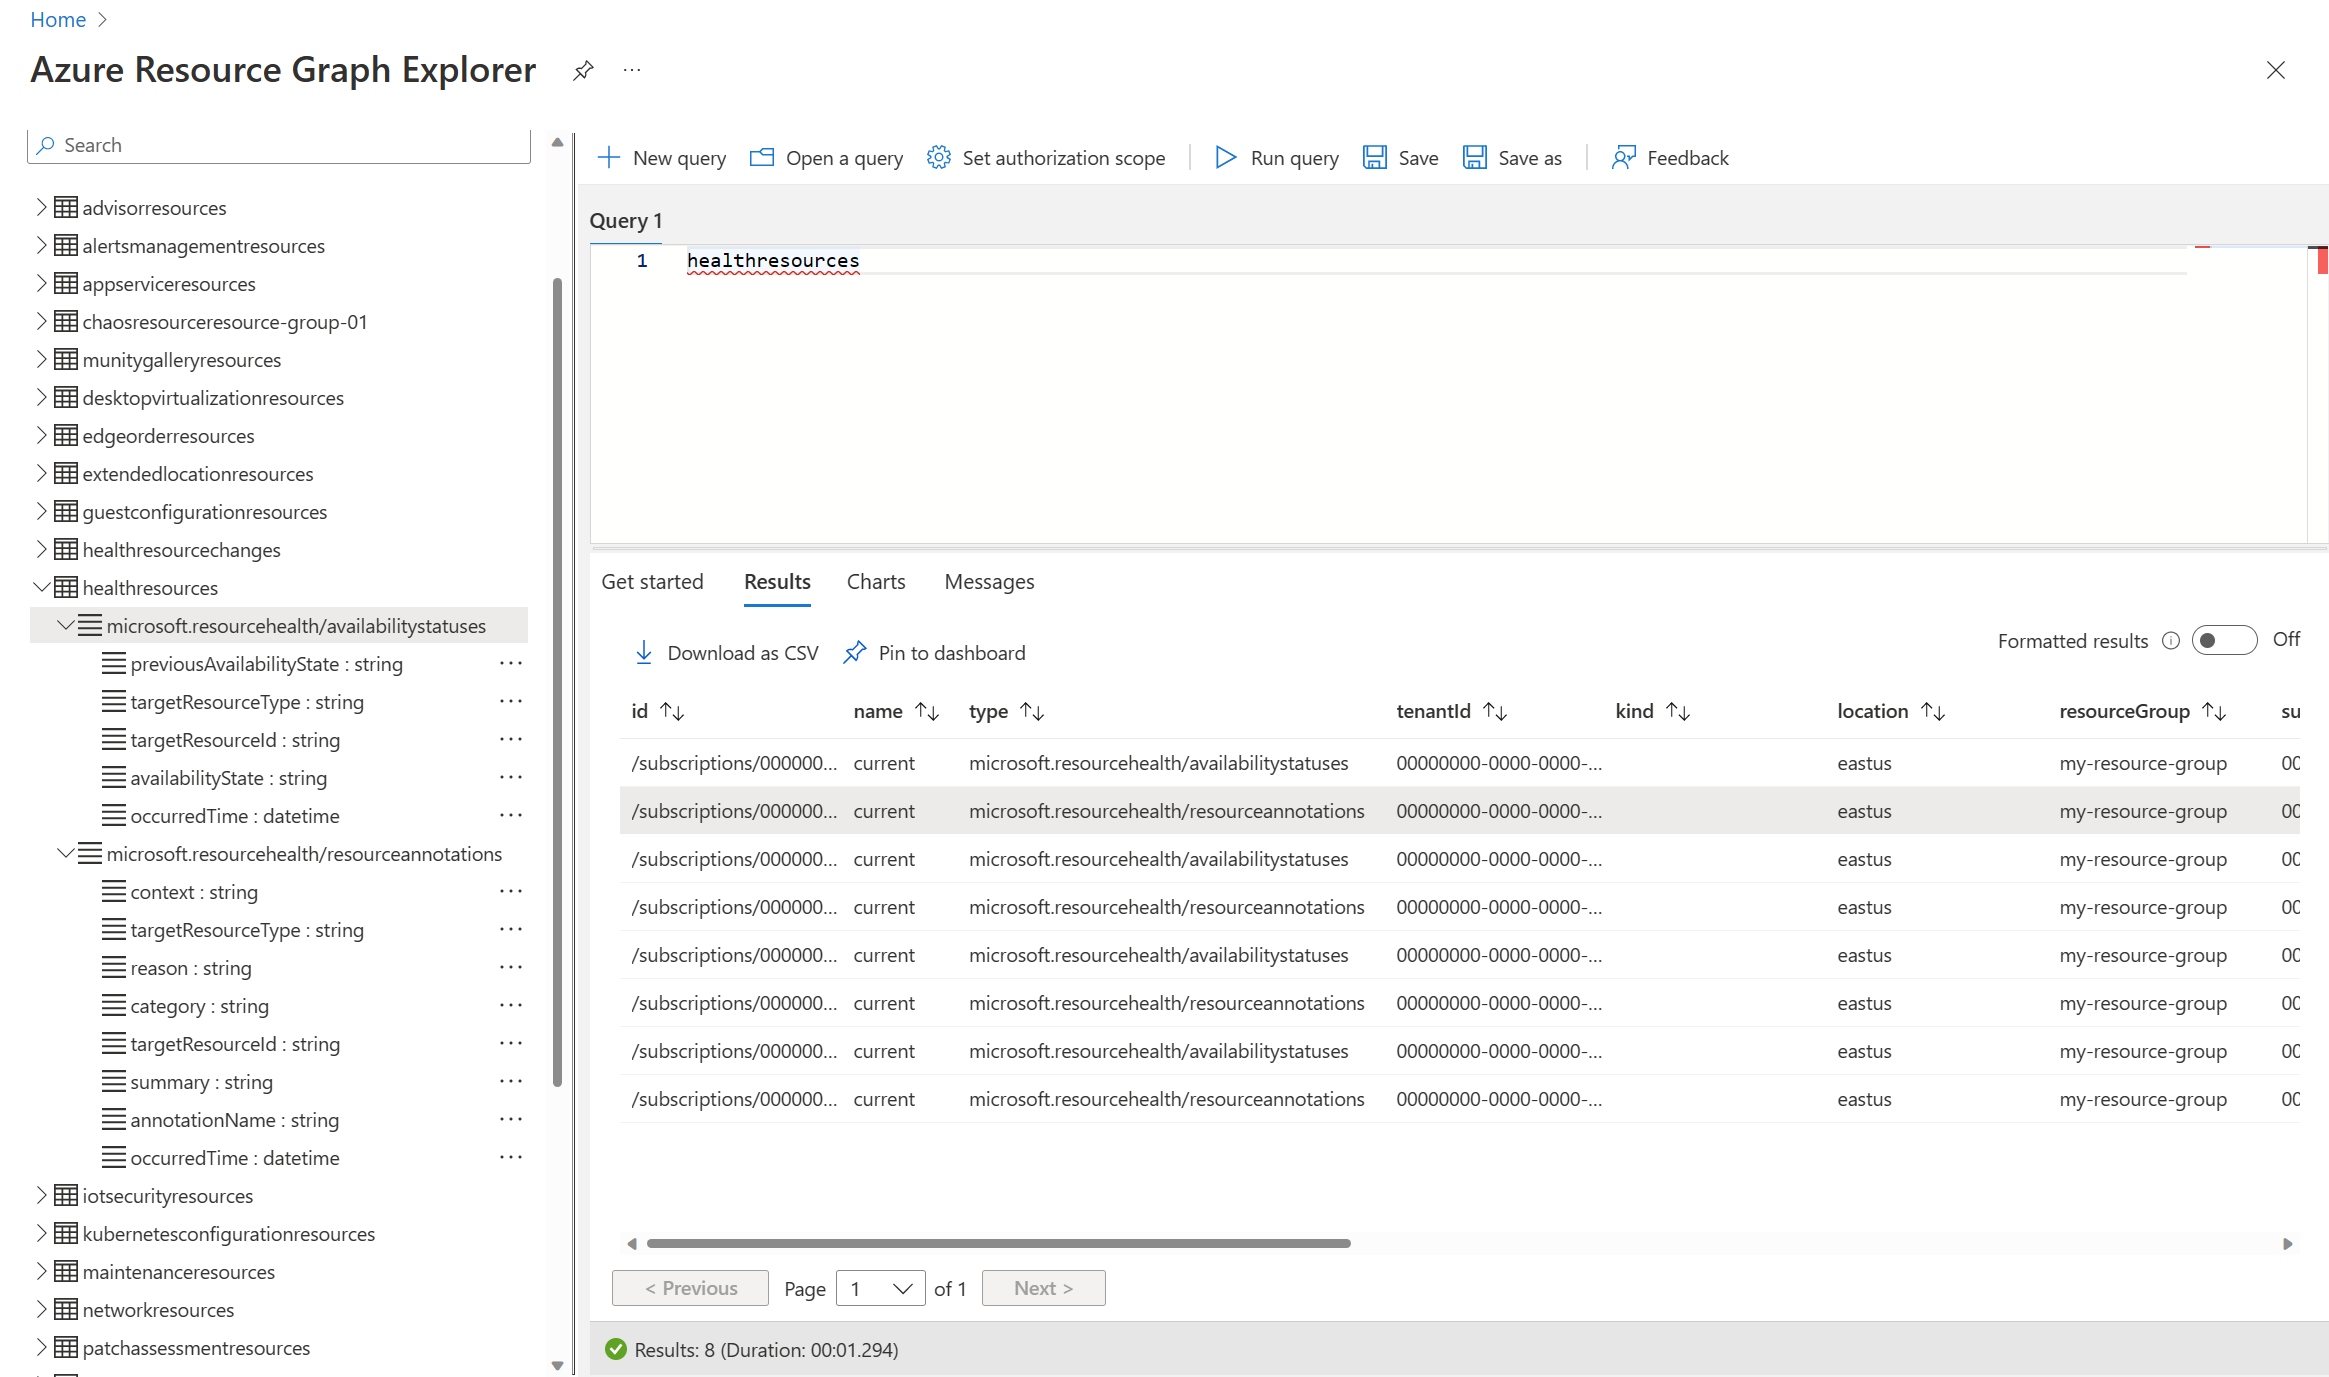 Screenshot of Azure Resource Graph with simple healthresources query.